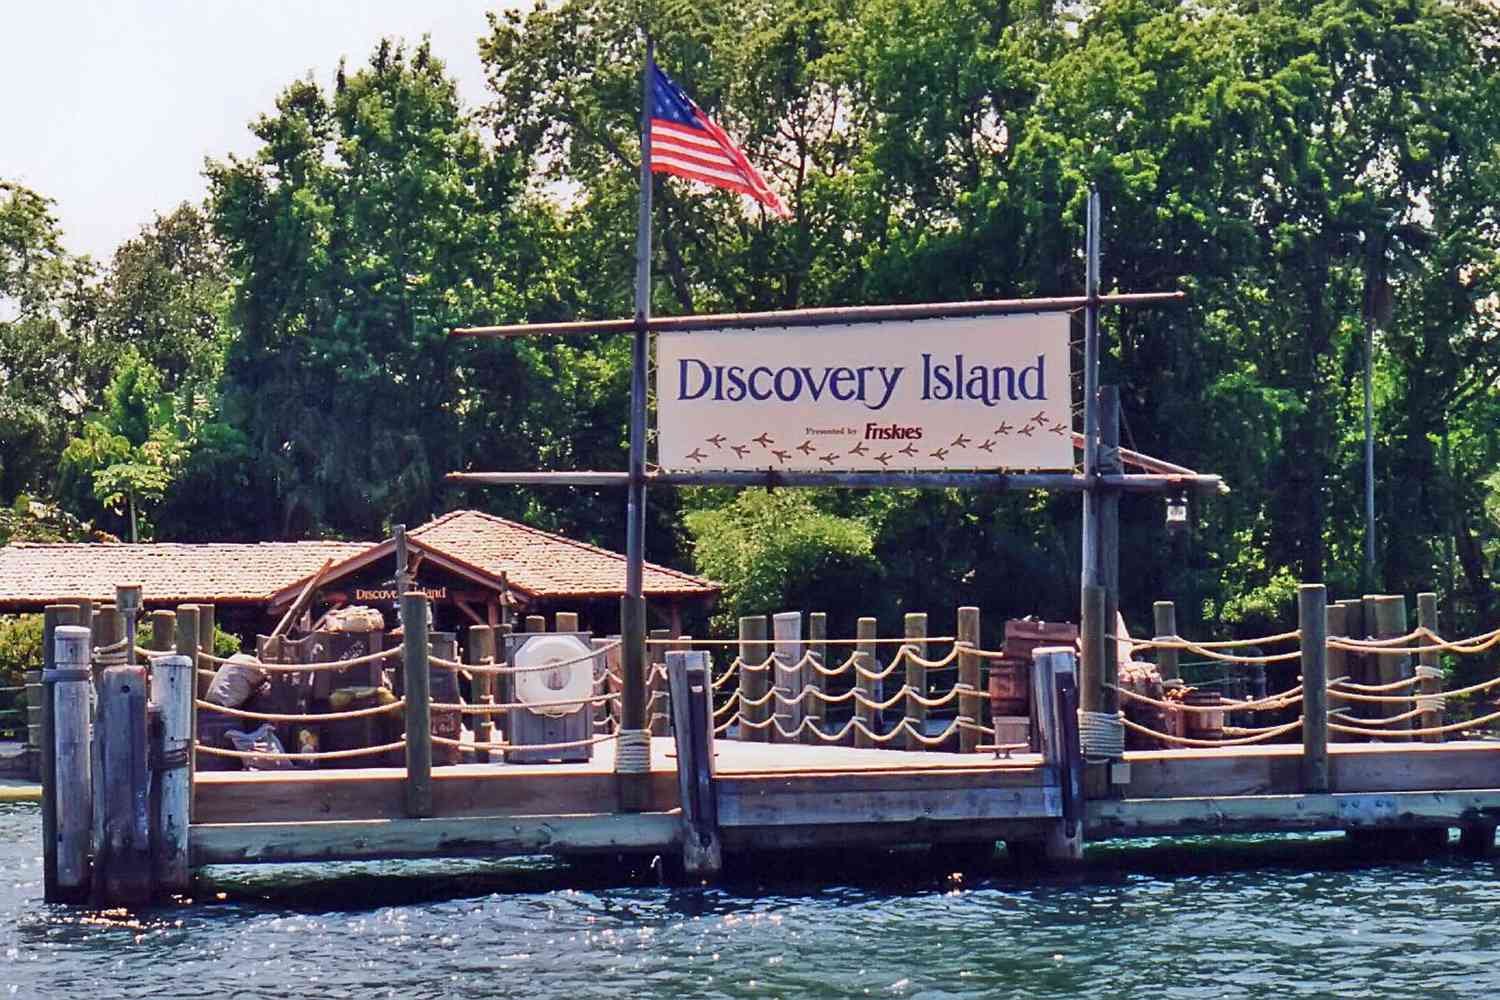 Discovery Island dock during operation